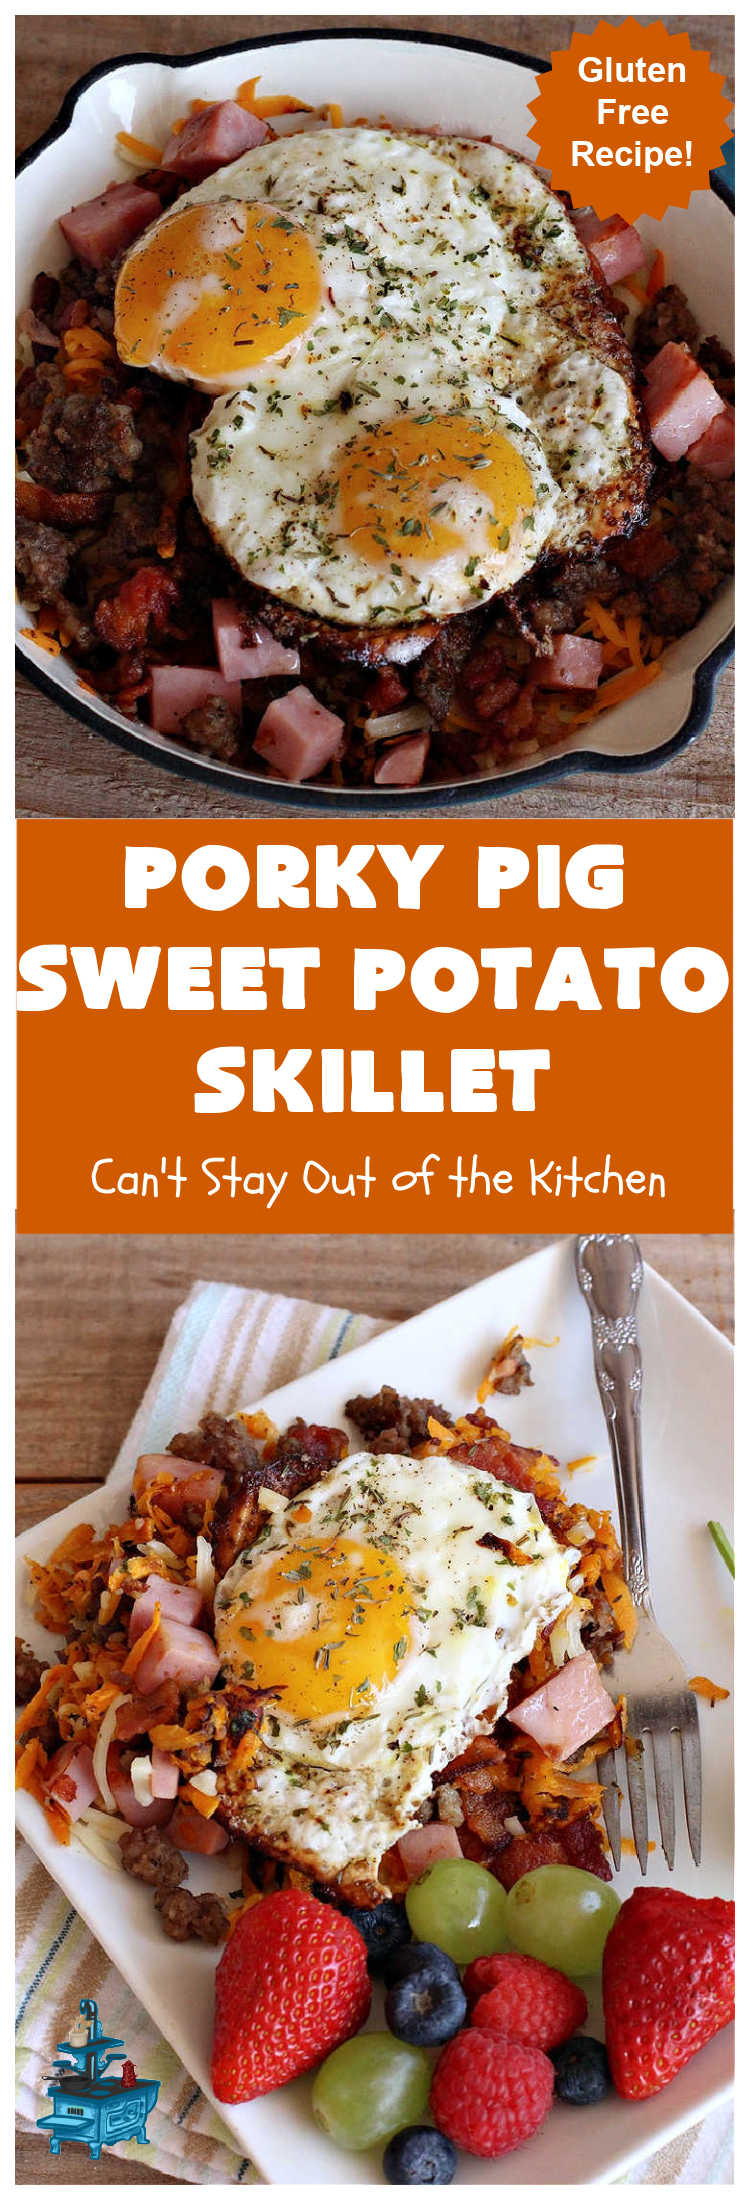 Porky Pig Sweet Potato Skillet | Can't Stay Out of the Kitchen